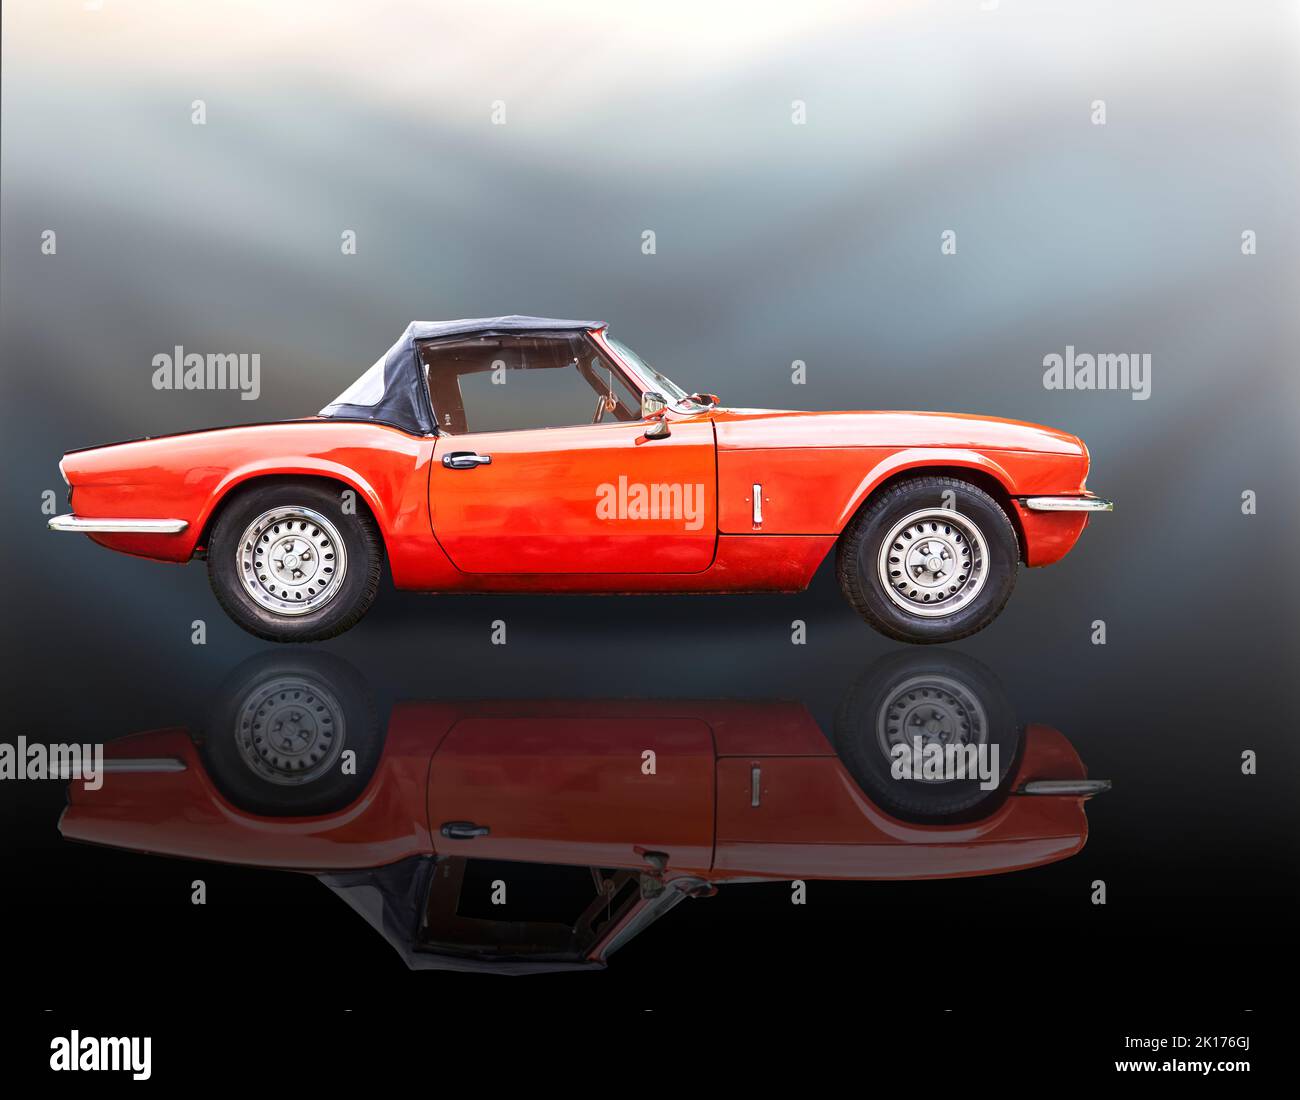 Triumph Spitfire sports car, side view of red convertible with reflection, Vehicle location Lehnin, Germany, September 11, 2022. Stock Photo